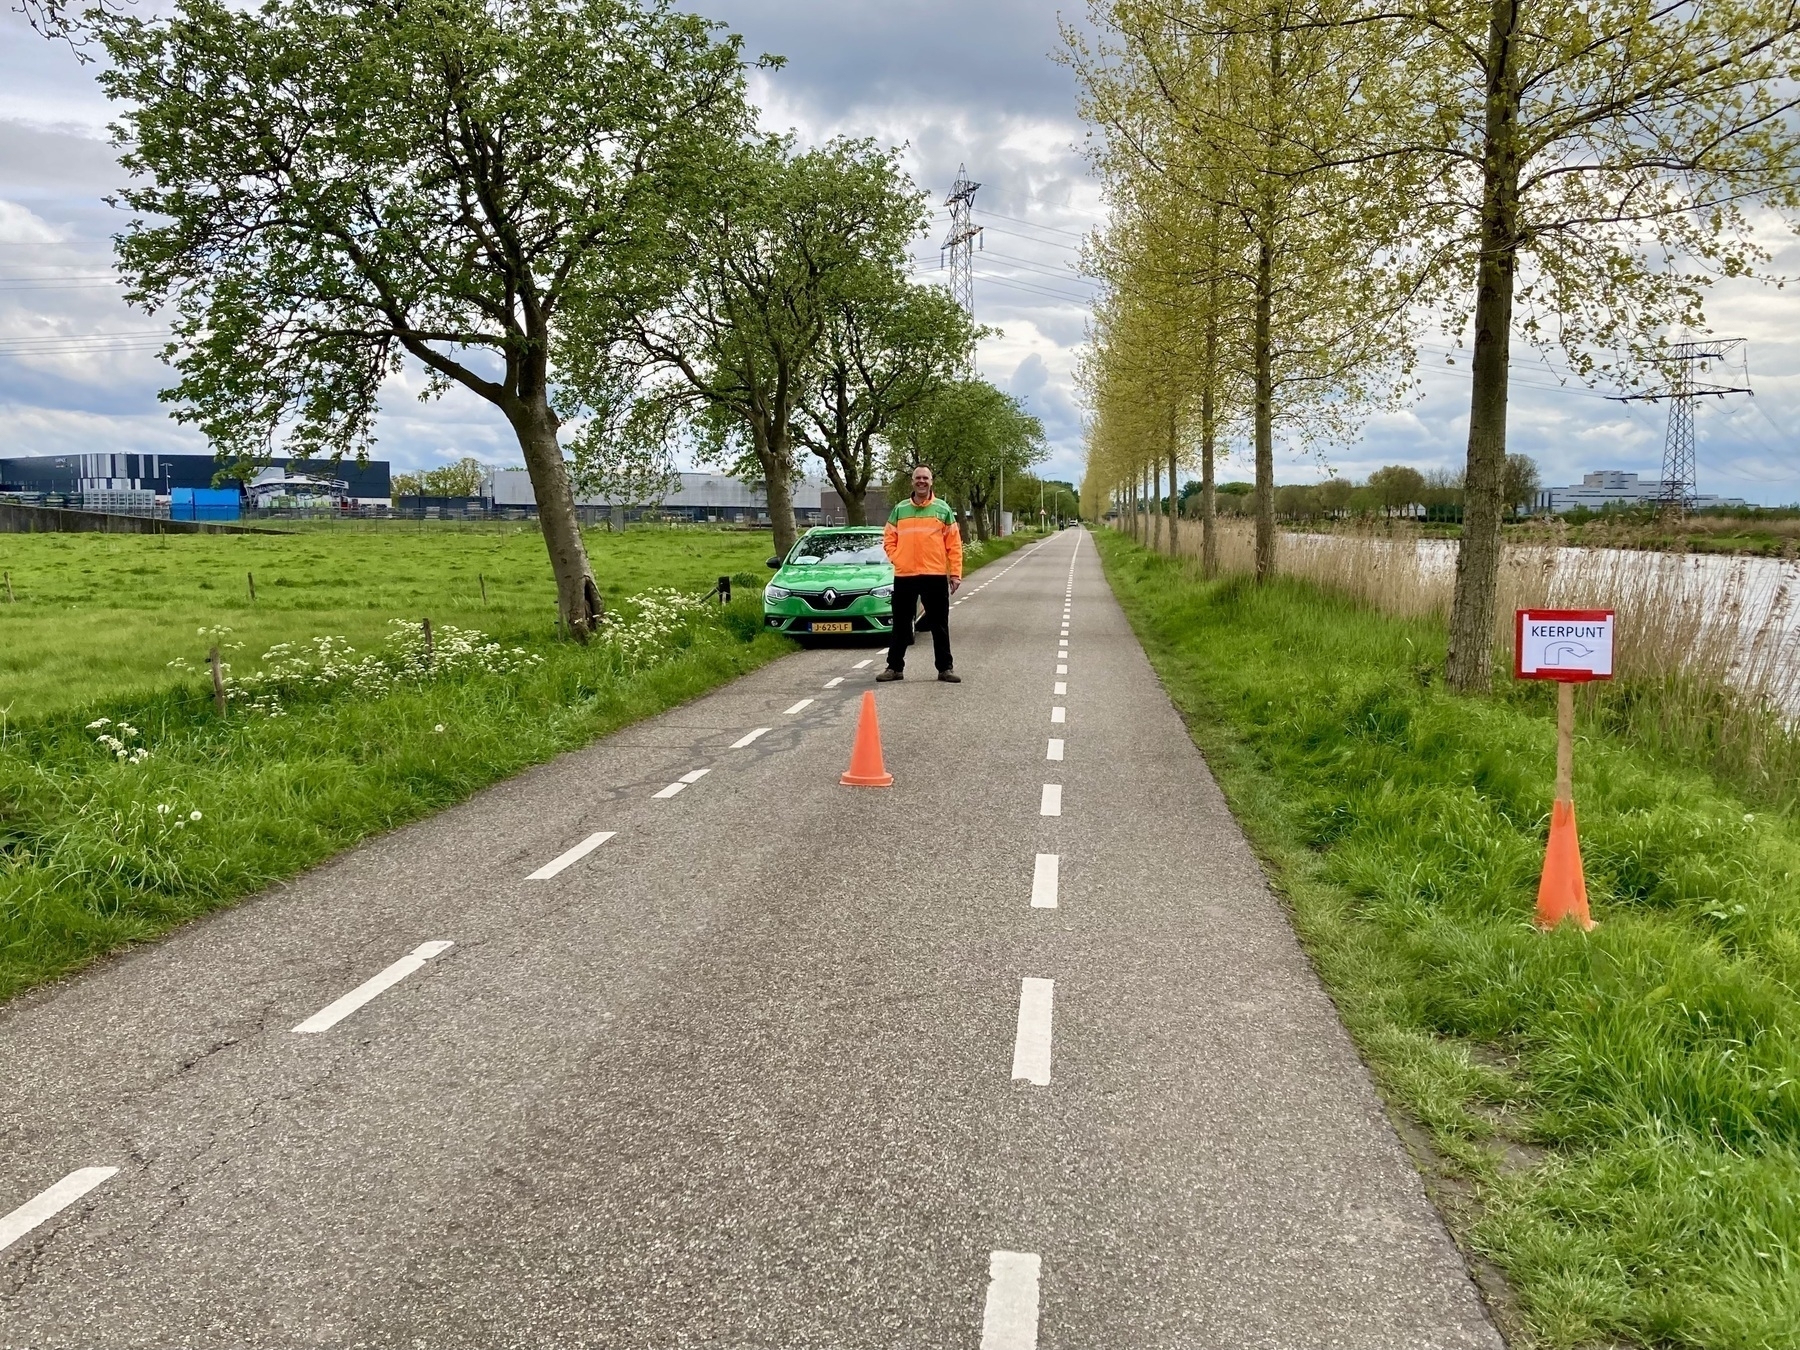 A person wearing a high-visibility vest stands between traffic cones on a small road lined with trees, with a green vehicle parked on the side and a red and white sign that indicates a message for runners to turn here.